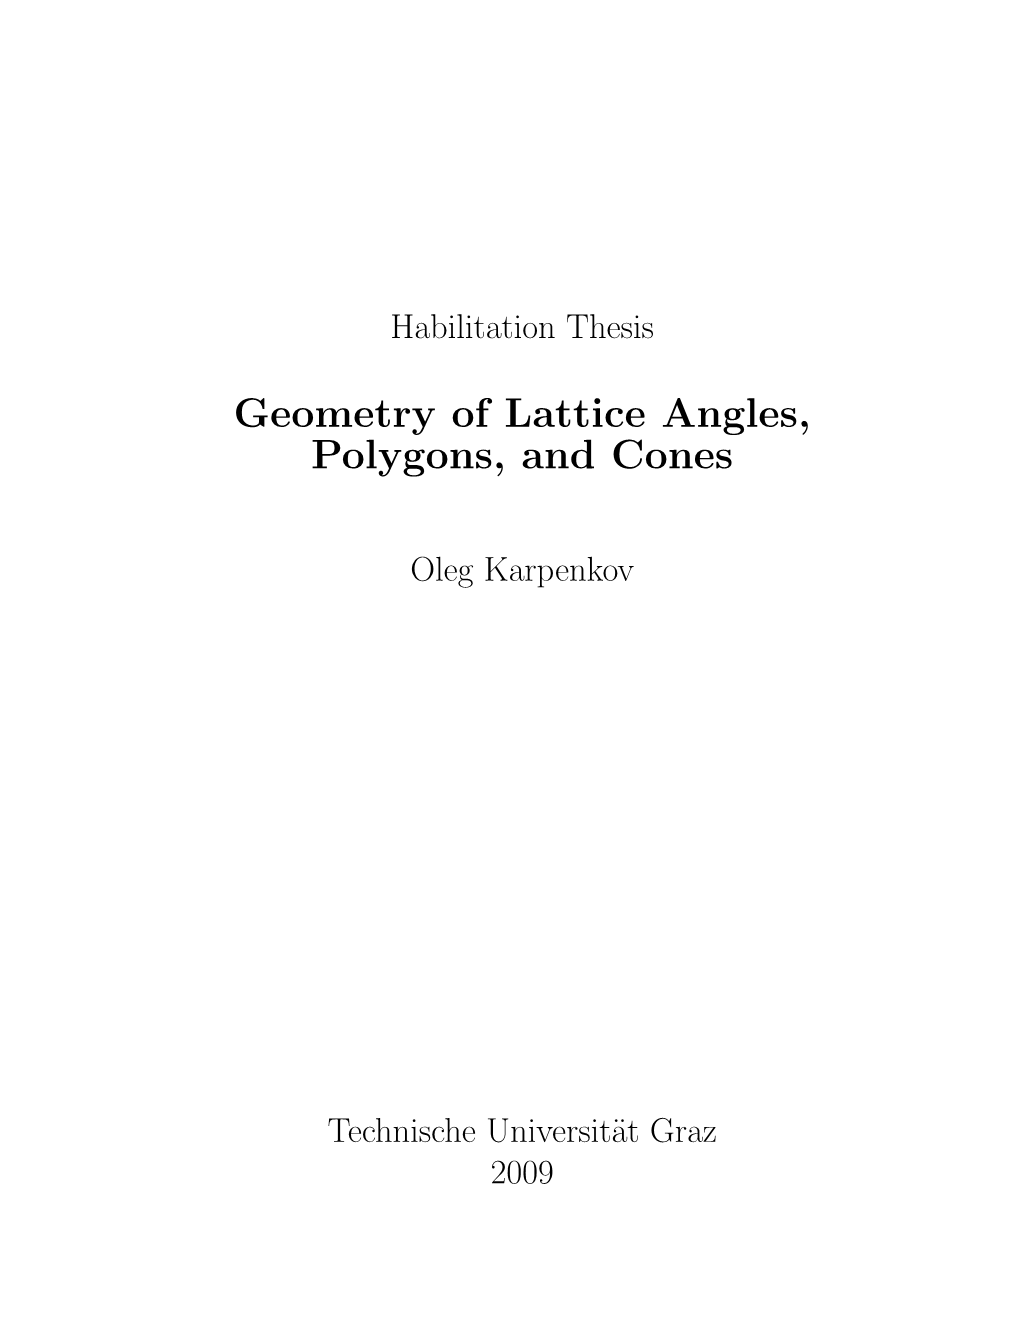 Geometry of Lattice Angles, Polygons, and Cones